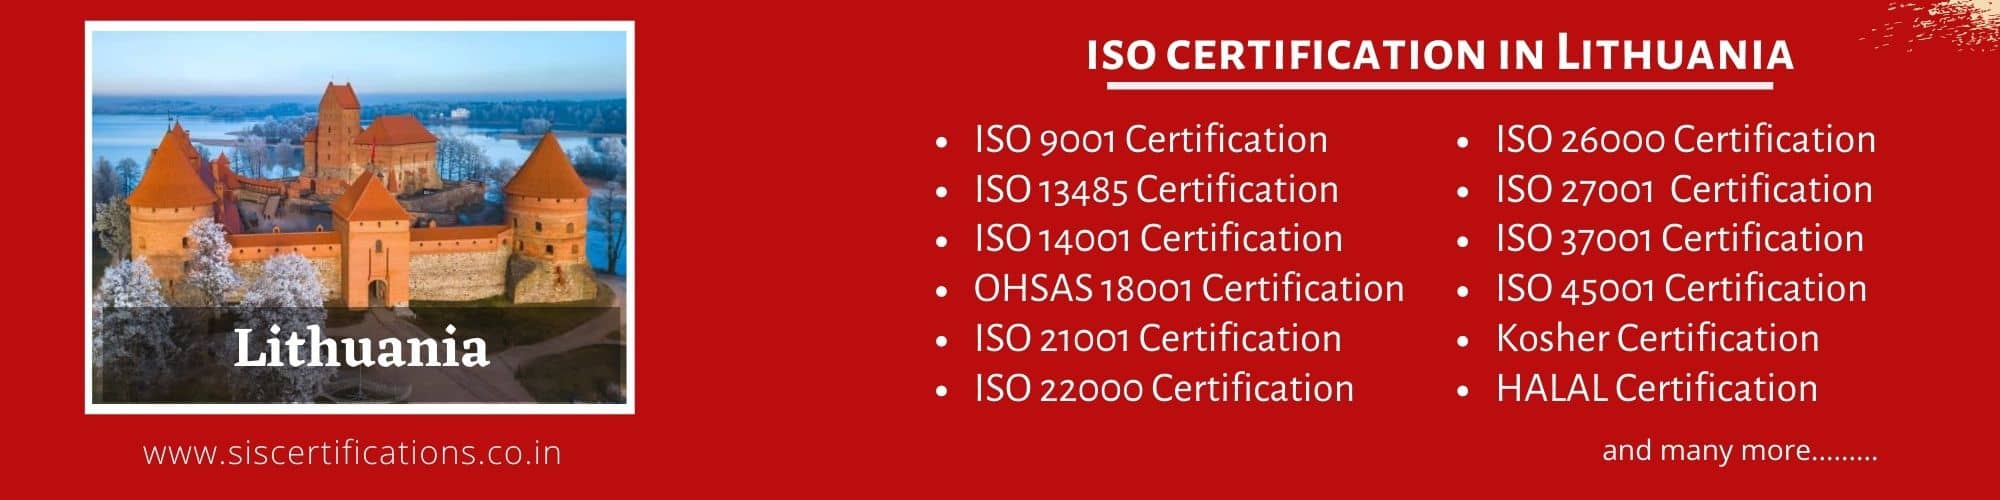 ISO Certification in Lithuania , ISO Certification in Lithuania